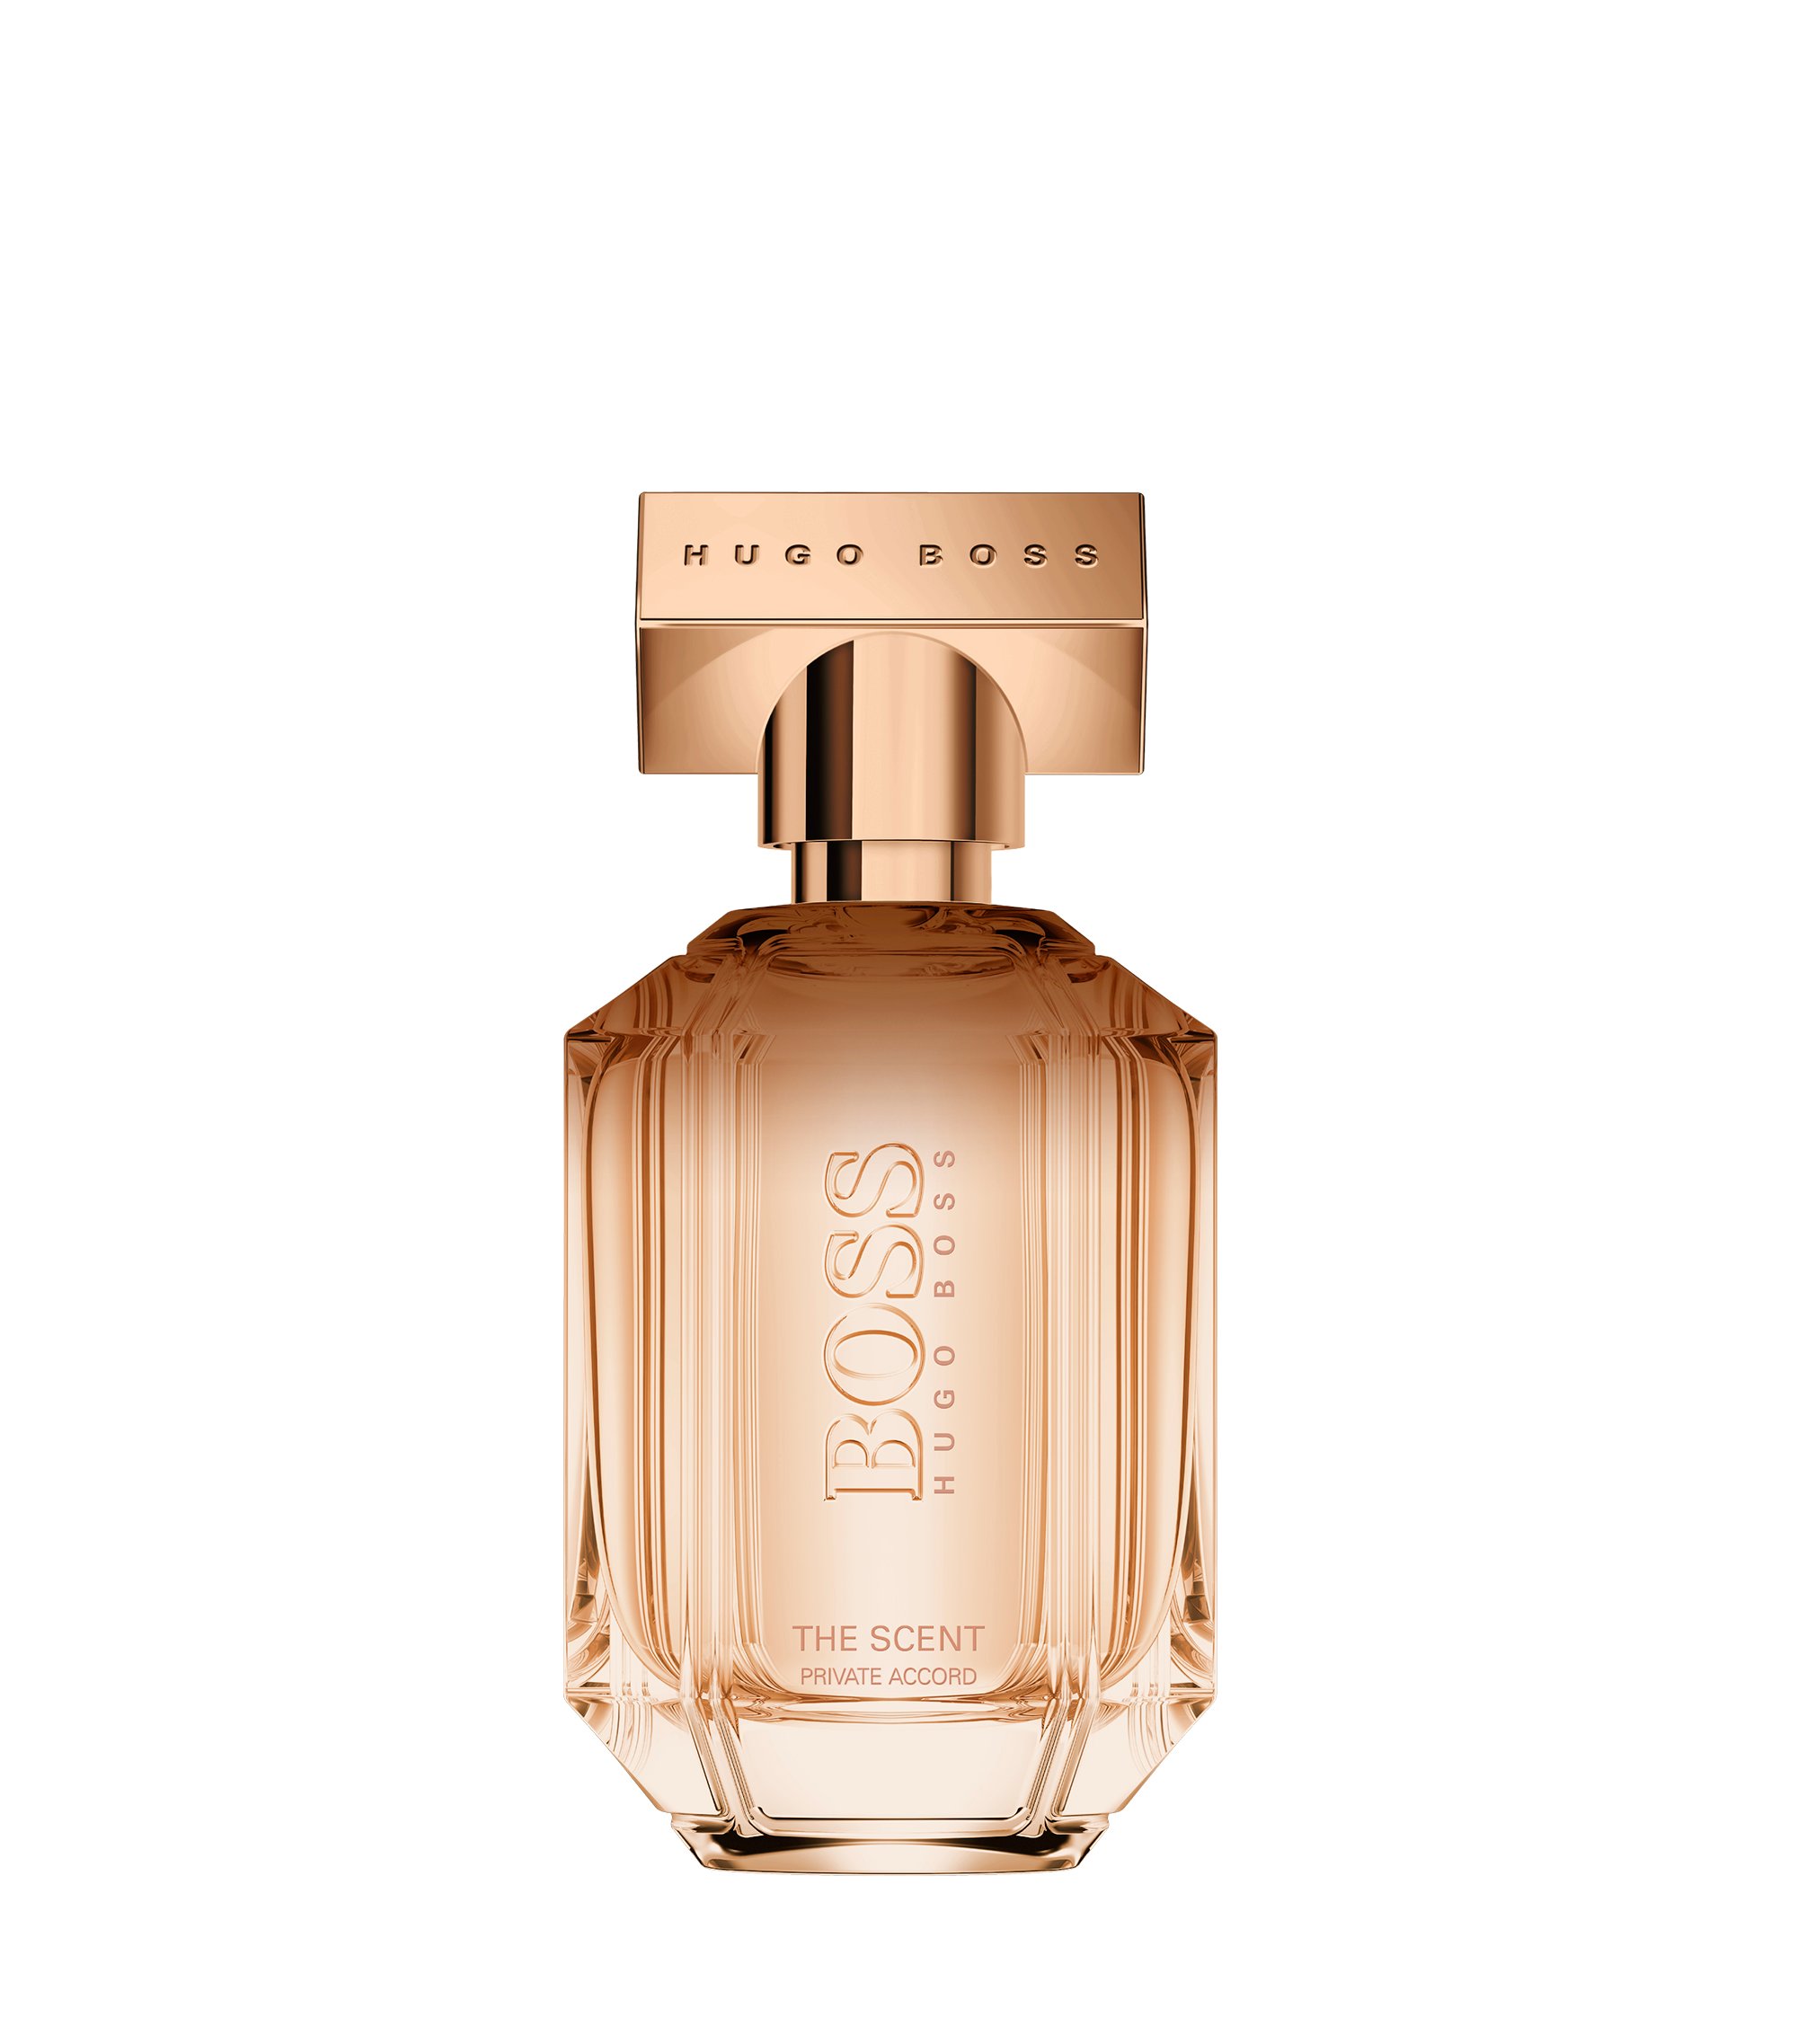 BOSS - BOSS The Scent Private Accord for Her eau de parfum 50ml